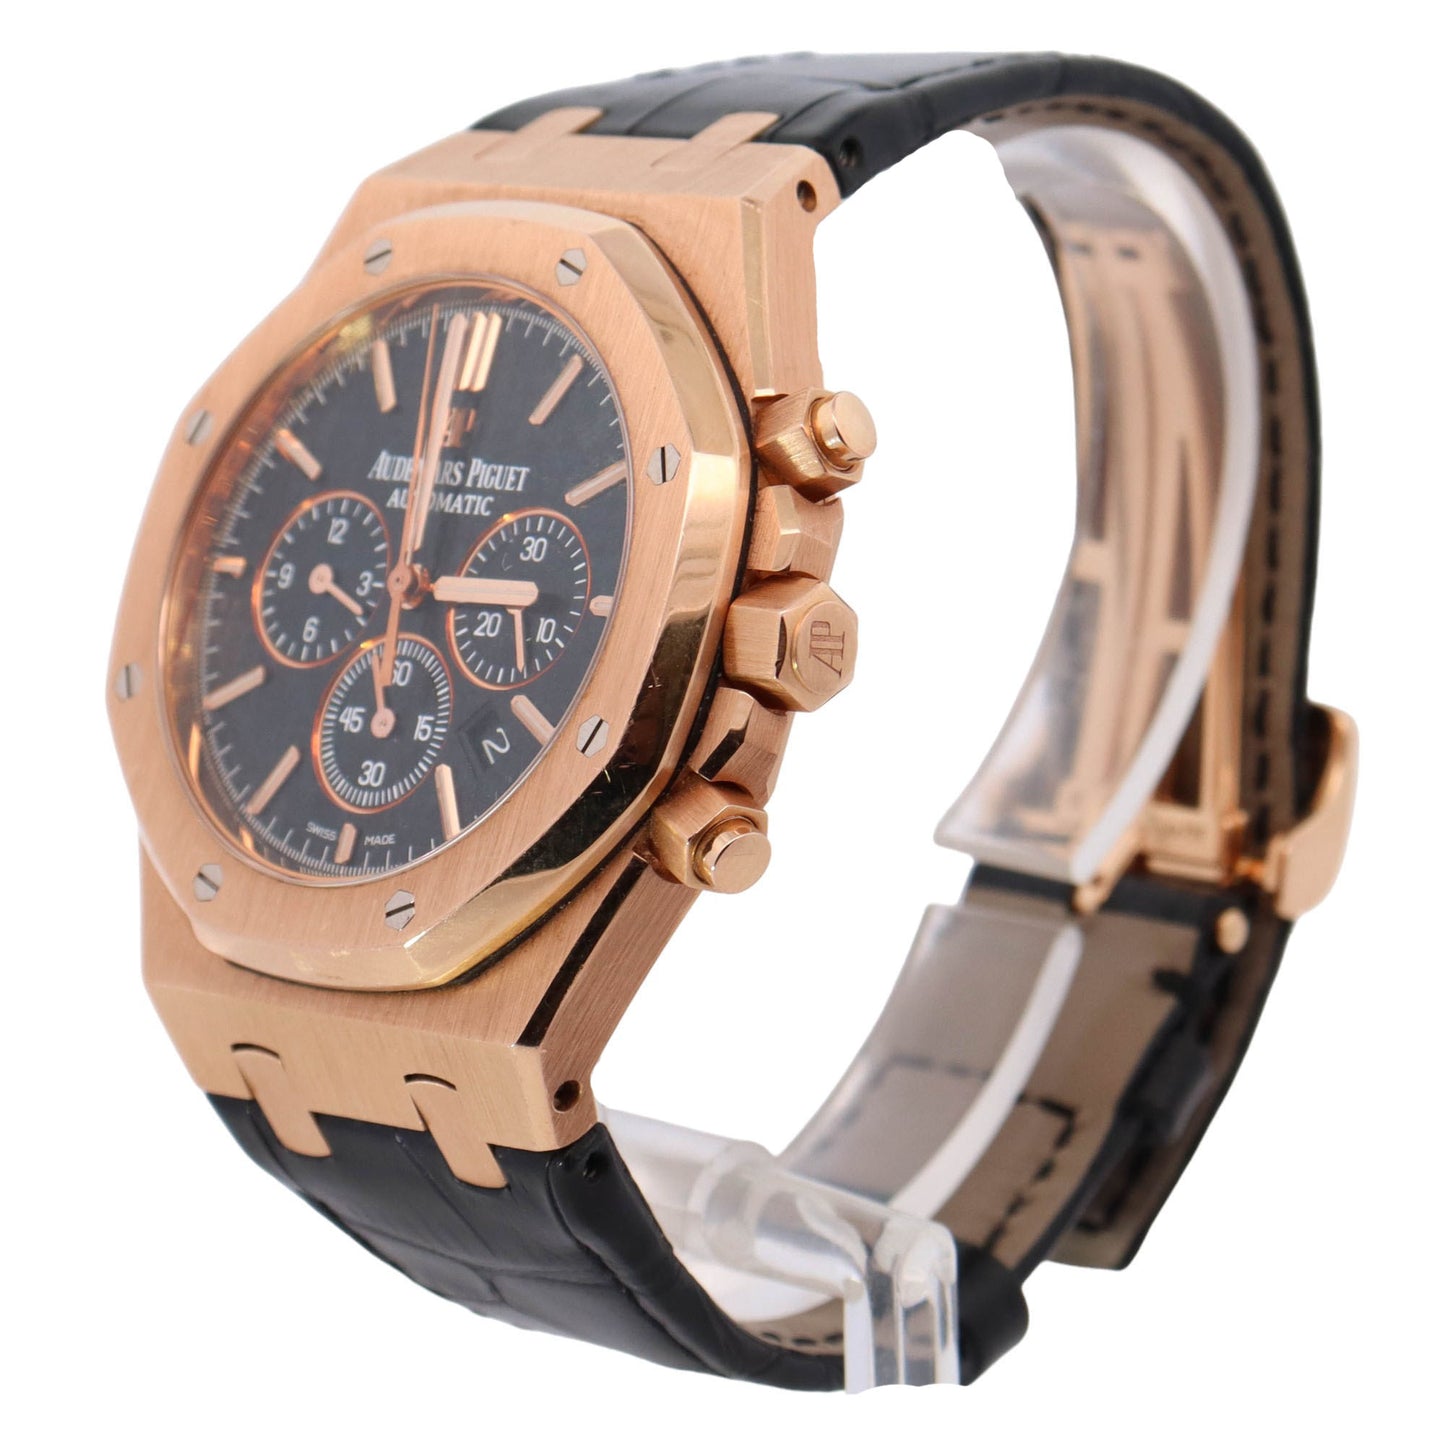 Audemars Piguet Royal Oak Rose Gold 41mm Black Chronograph Dial Watch Reference# 26320OR.OO.D002CR.01 - Happy Jewelers Fine Jewelry Lifetime Warranty